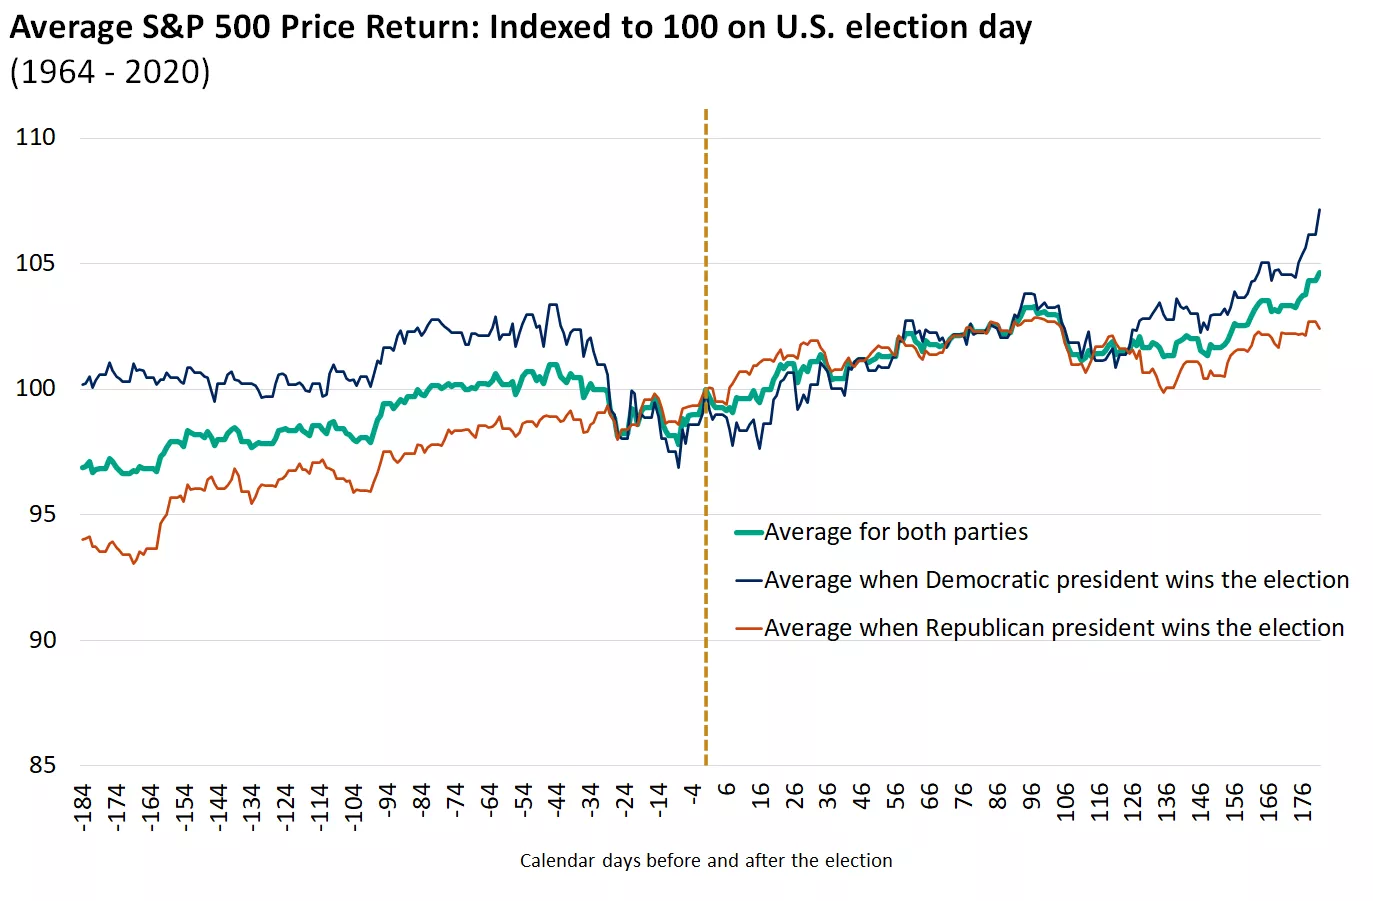  Chart shows the average performance of the S&P 500 in the six-months before and after U.S. election
